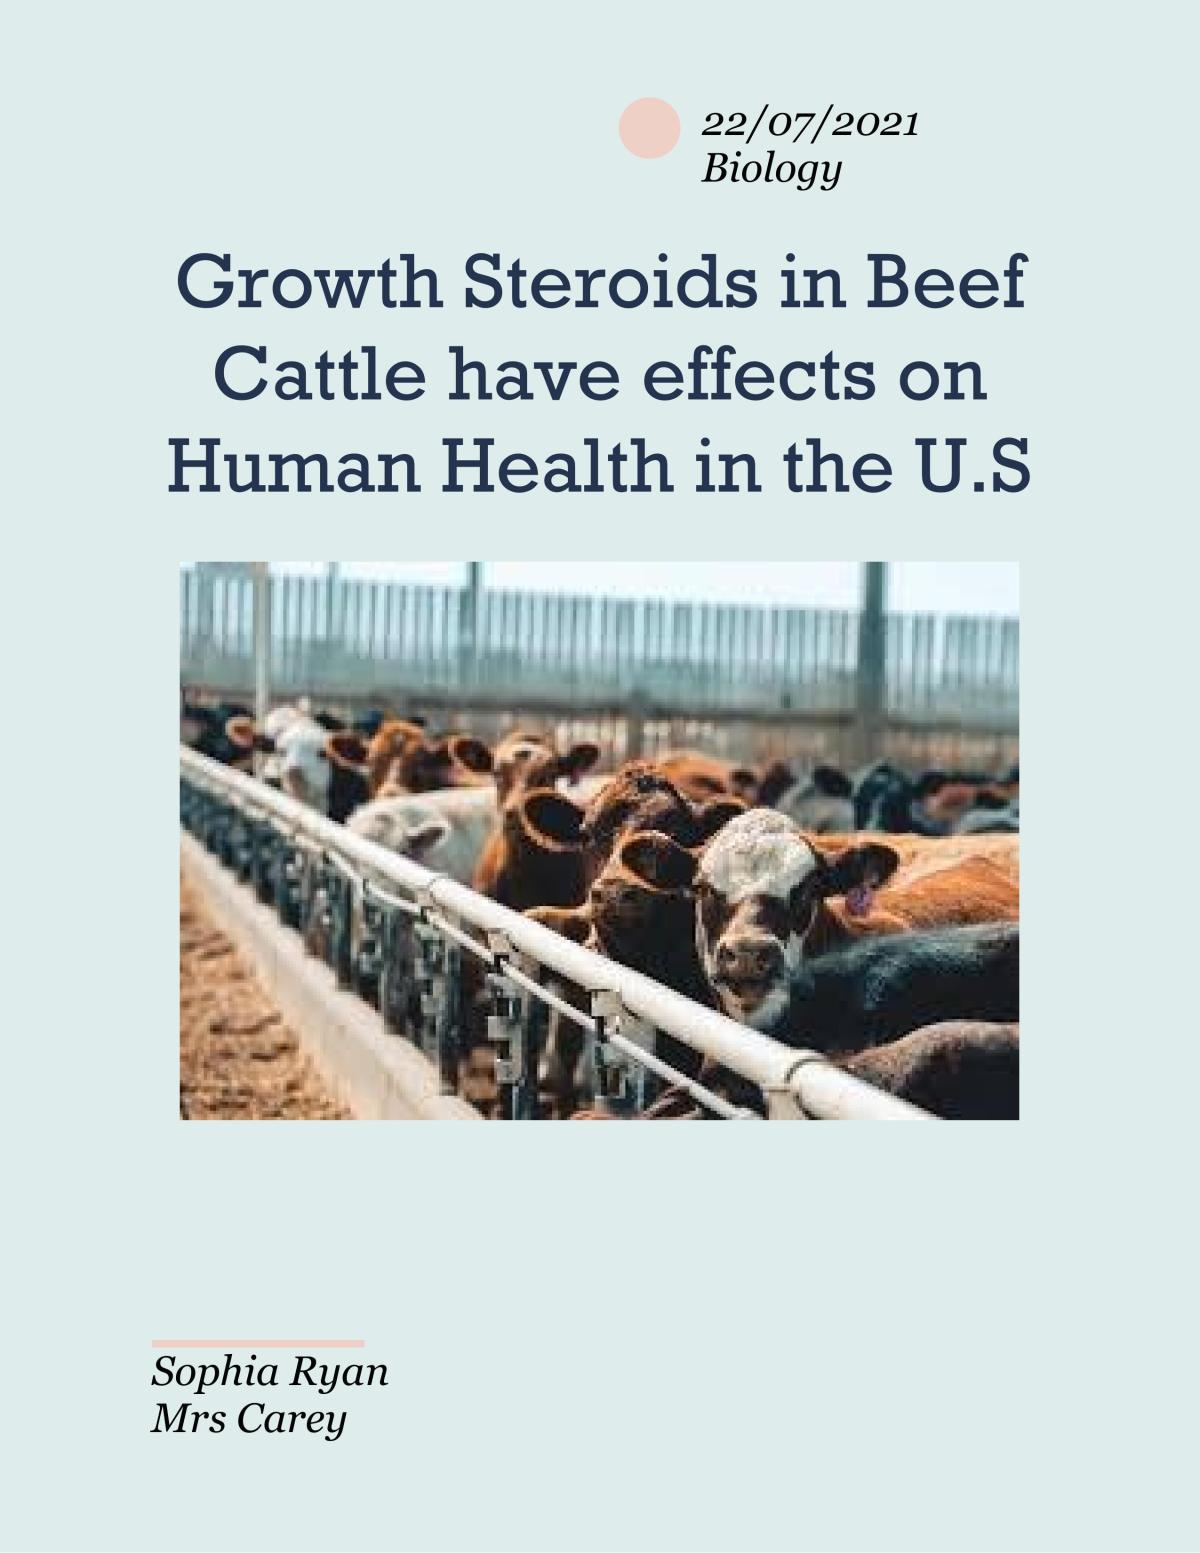 Growth Steroids in Beef Cattle Have Effects on Human Health - Page 1